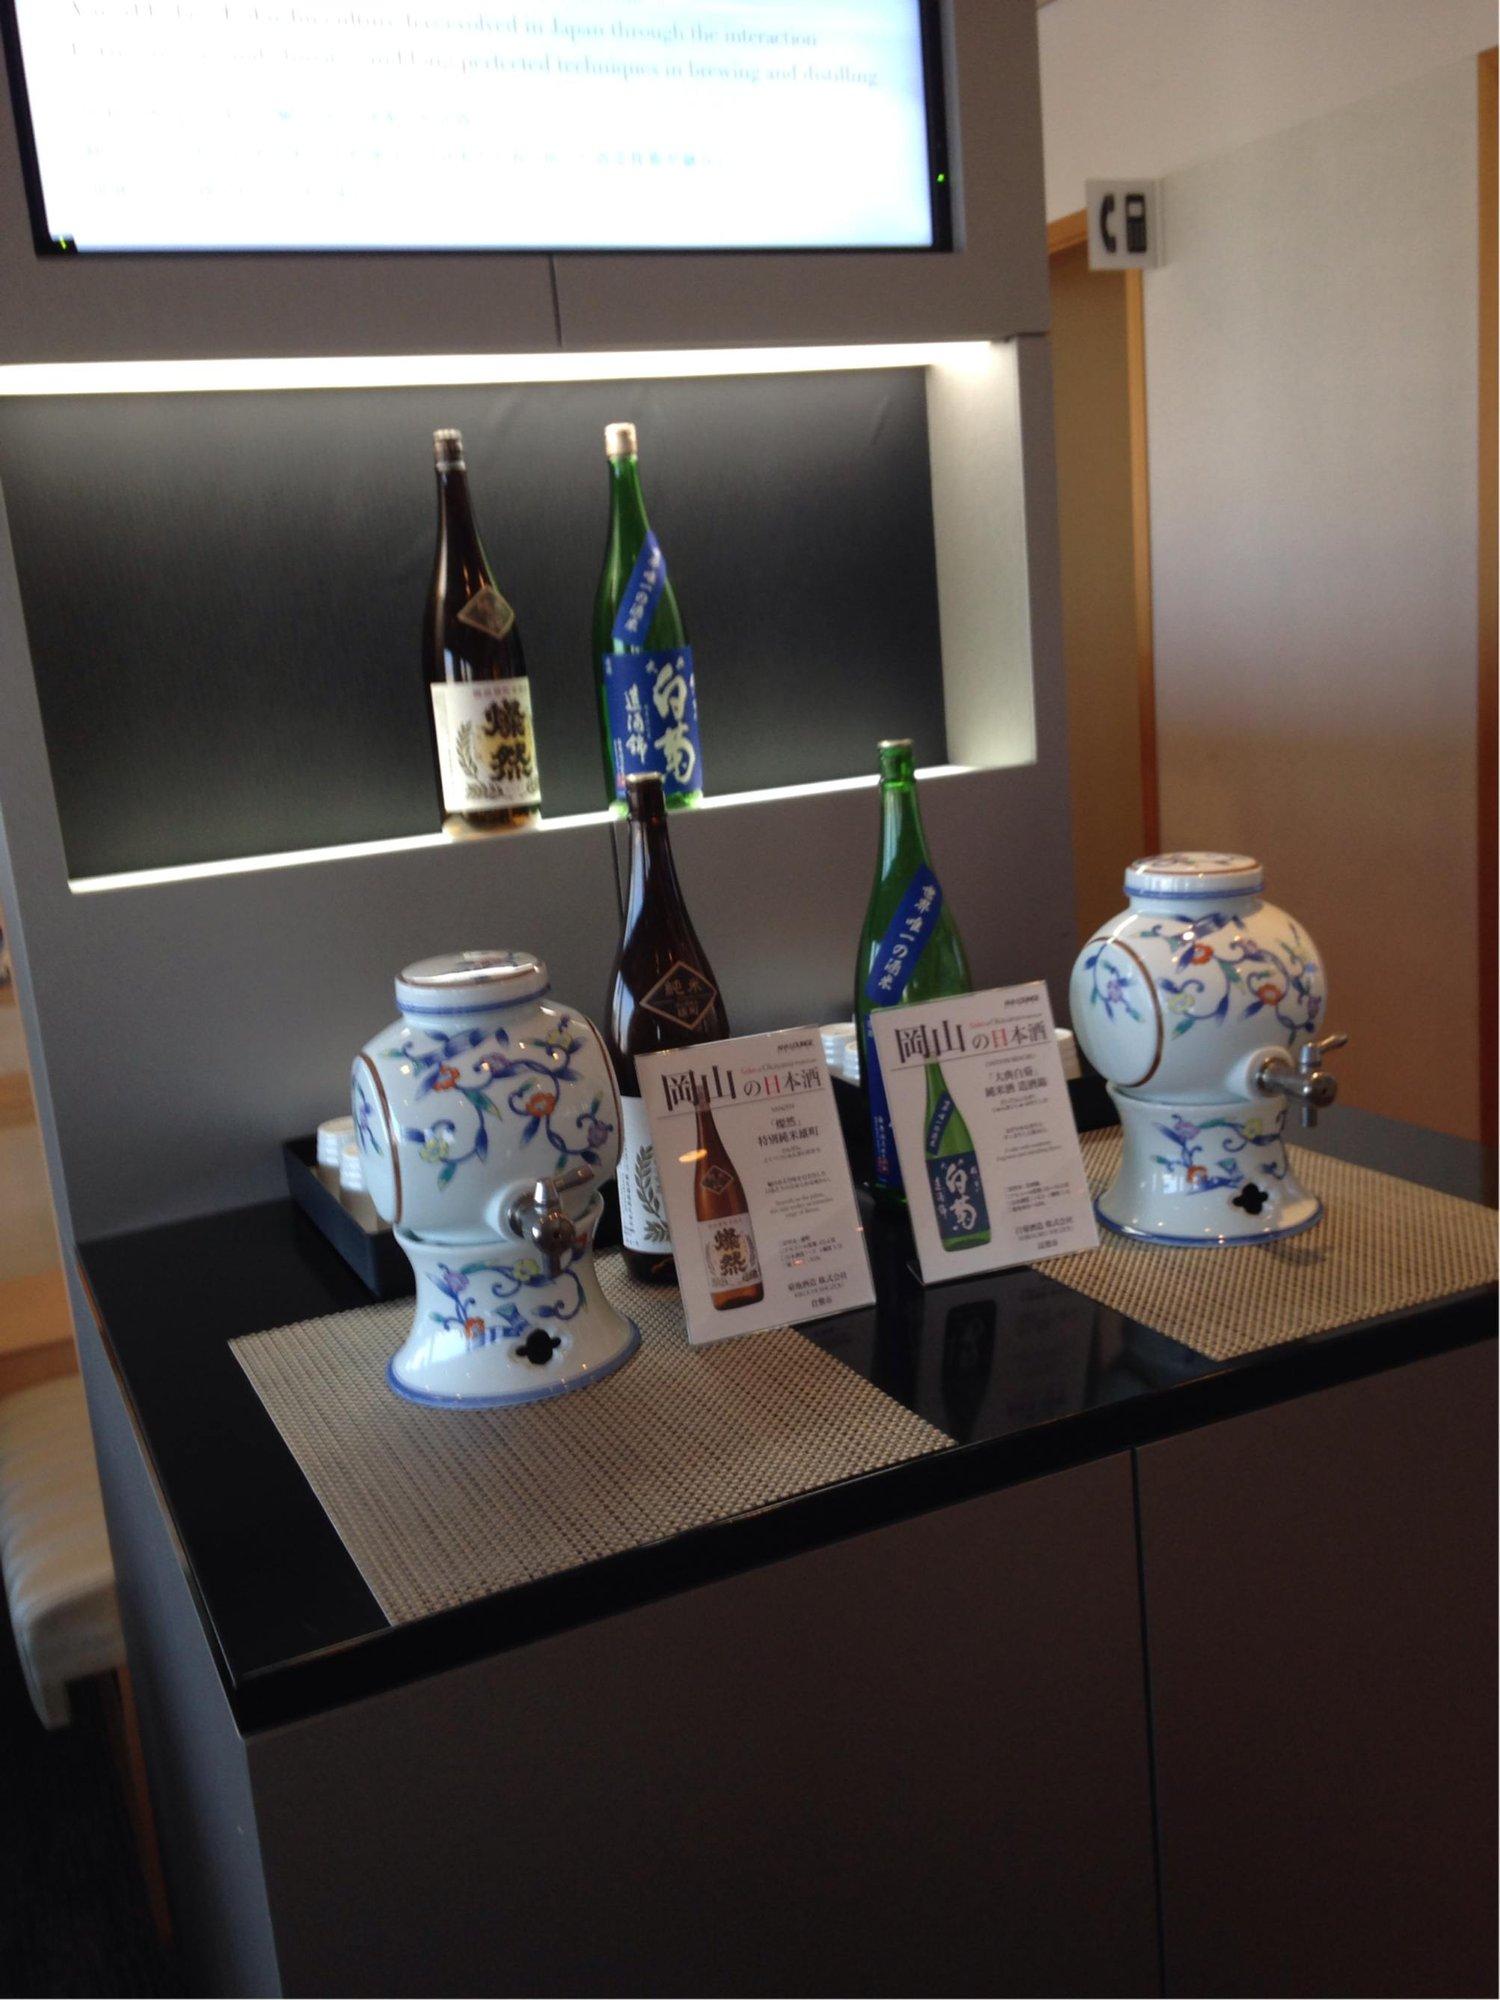 All Nippon Airways ANA Lounge image 3 of 7